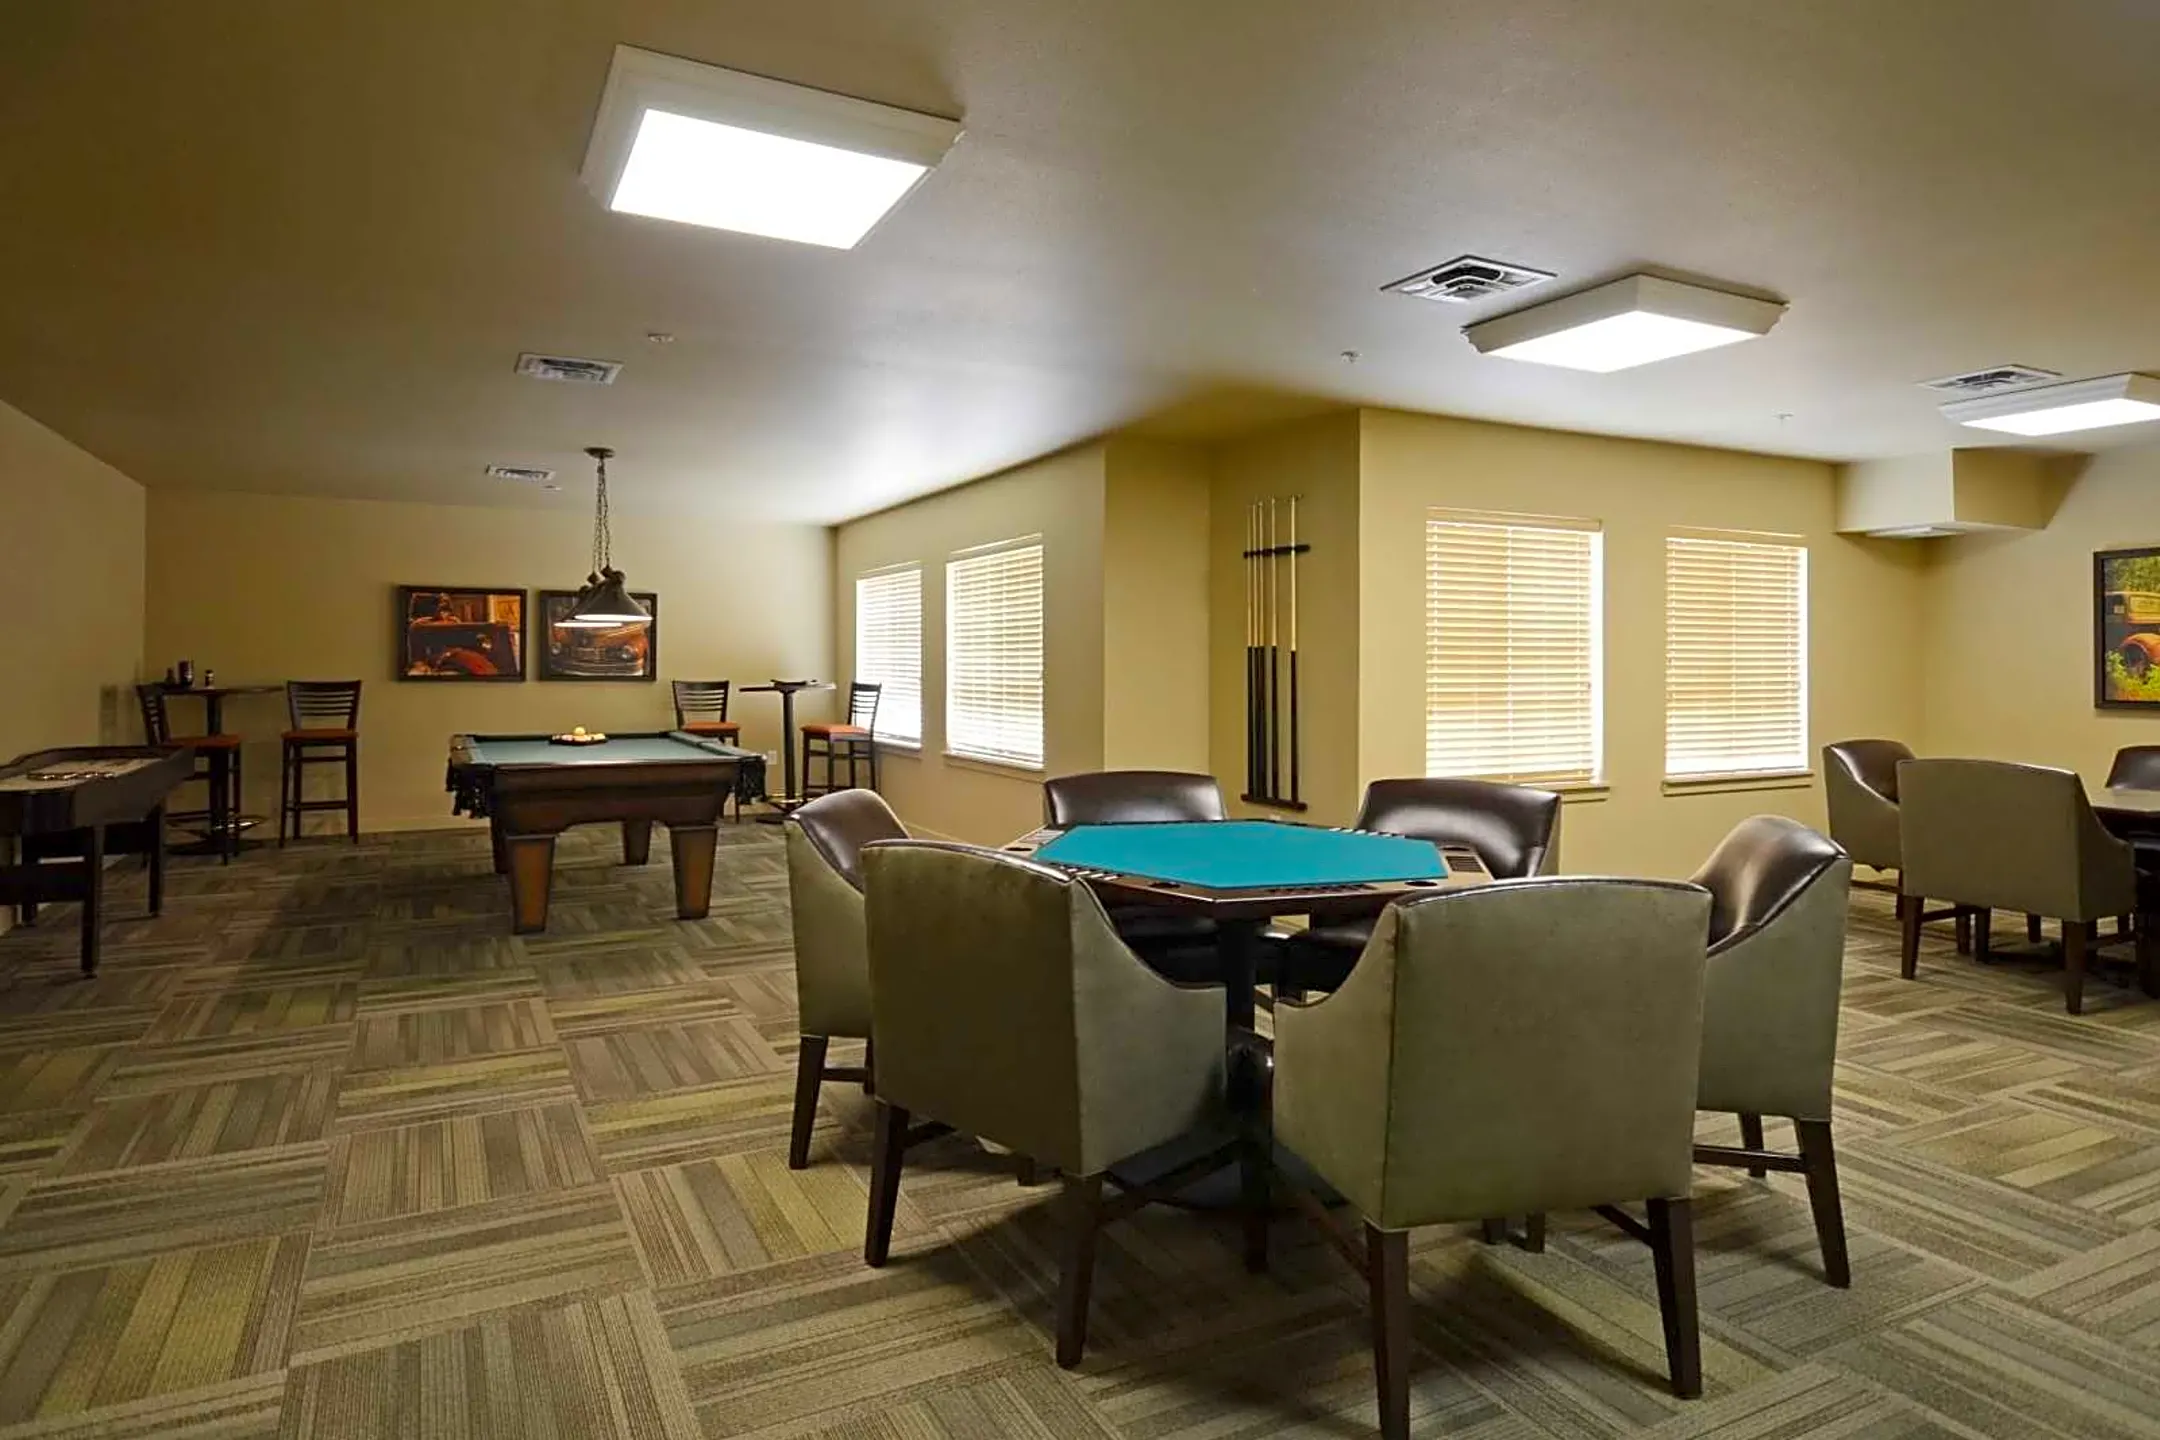 Clubhouse - Affinity at Boise 55+ Living - Boise, ID